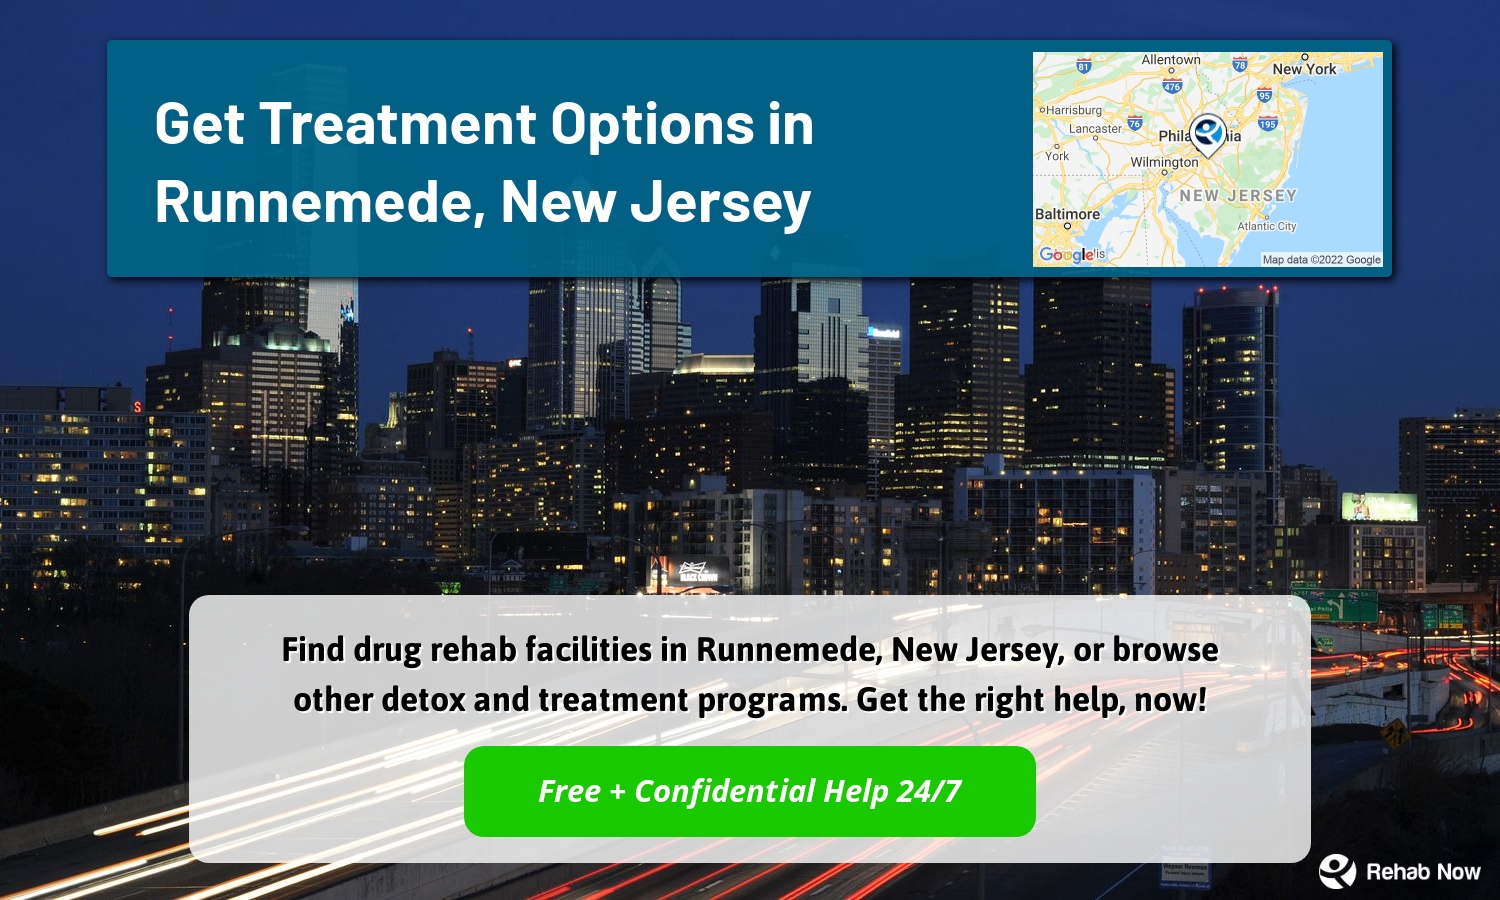 Find drug rehab facilities in Runnemede, New Jersey, or browse other detox and treatment programs. Get the right help, now!